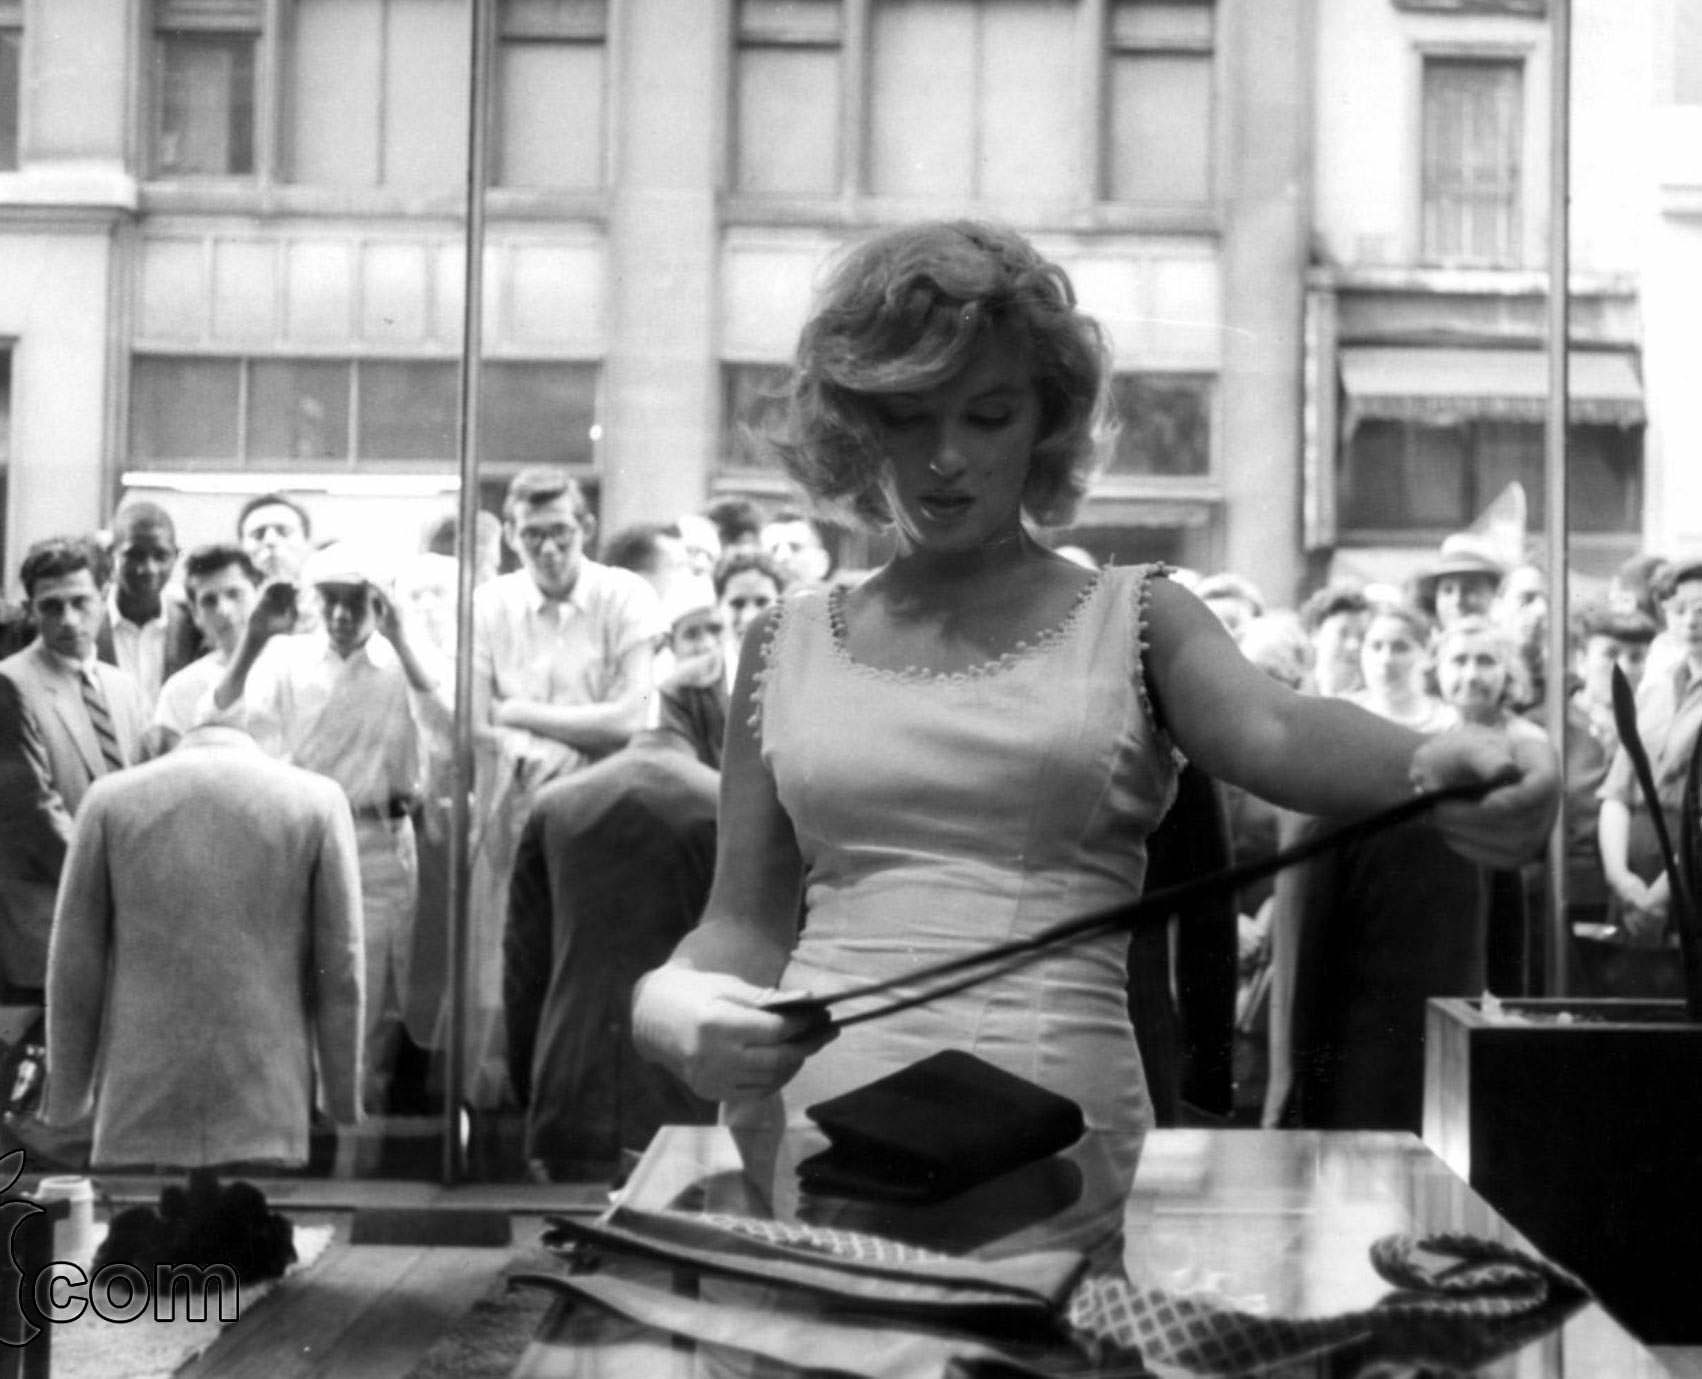 A crown gathers just to watch Marilyn Monroe shop on Fifth Avenue in 1957.